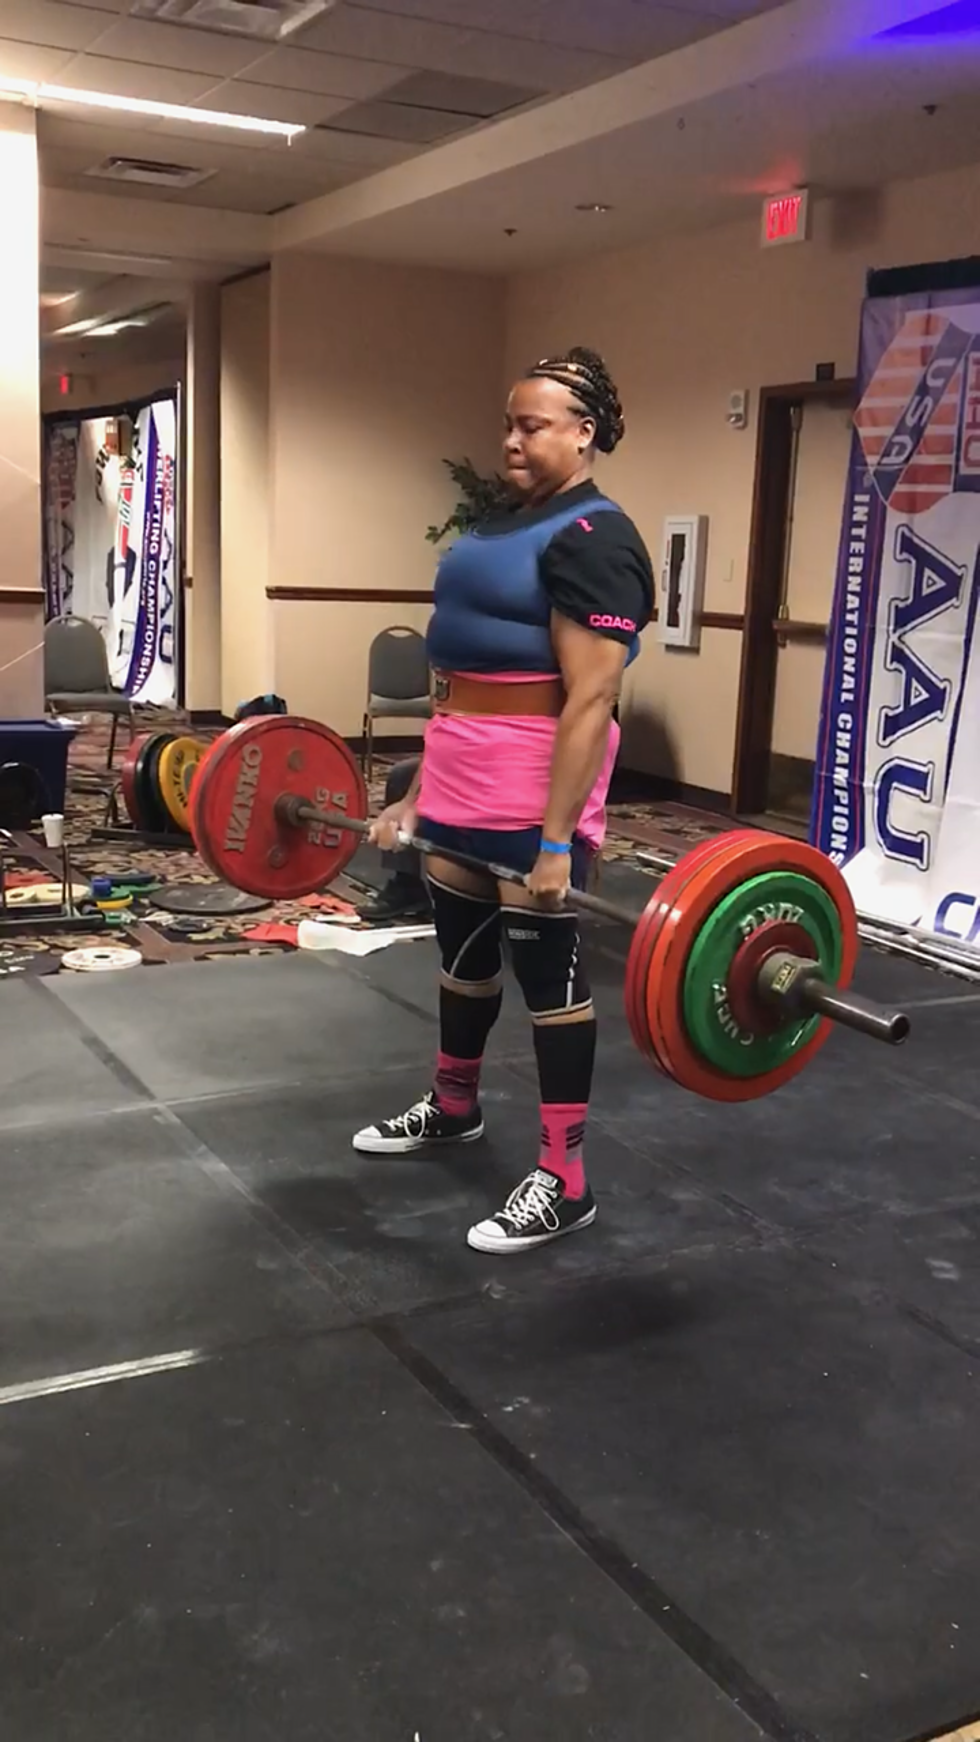 Local Power Lifter Fights to Compete in Her Skirt